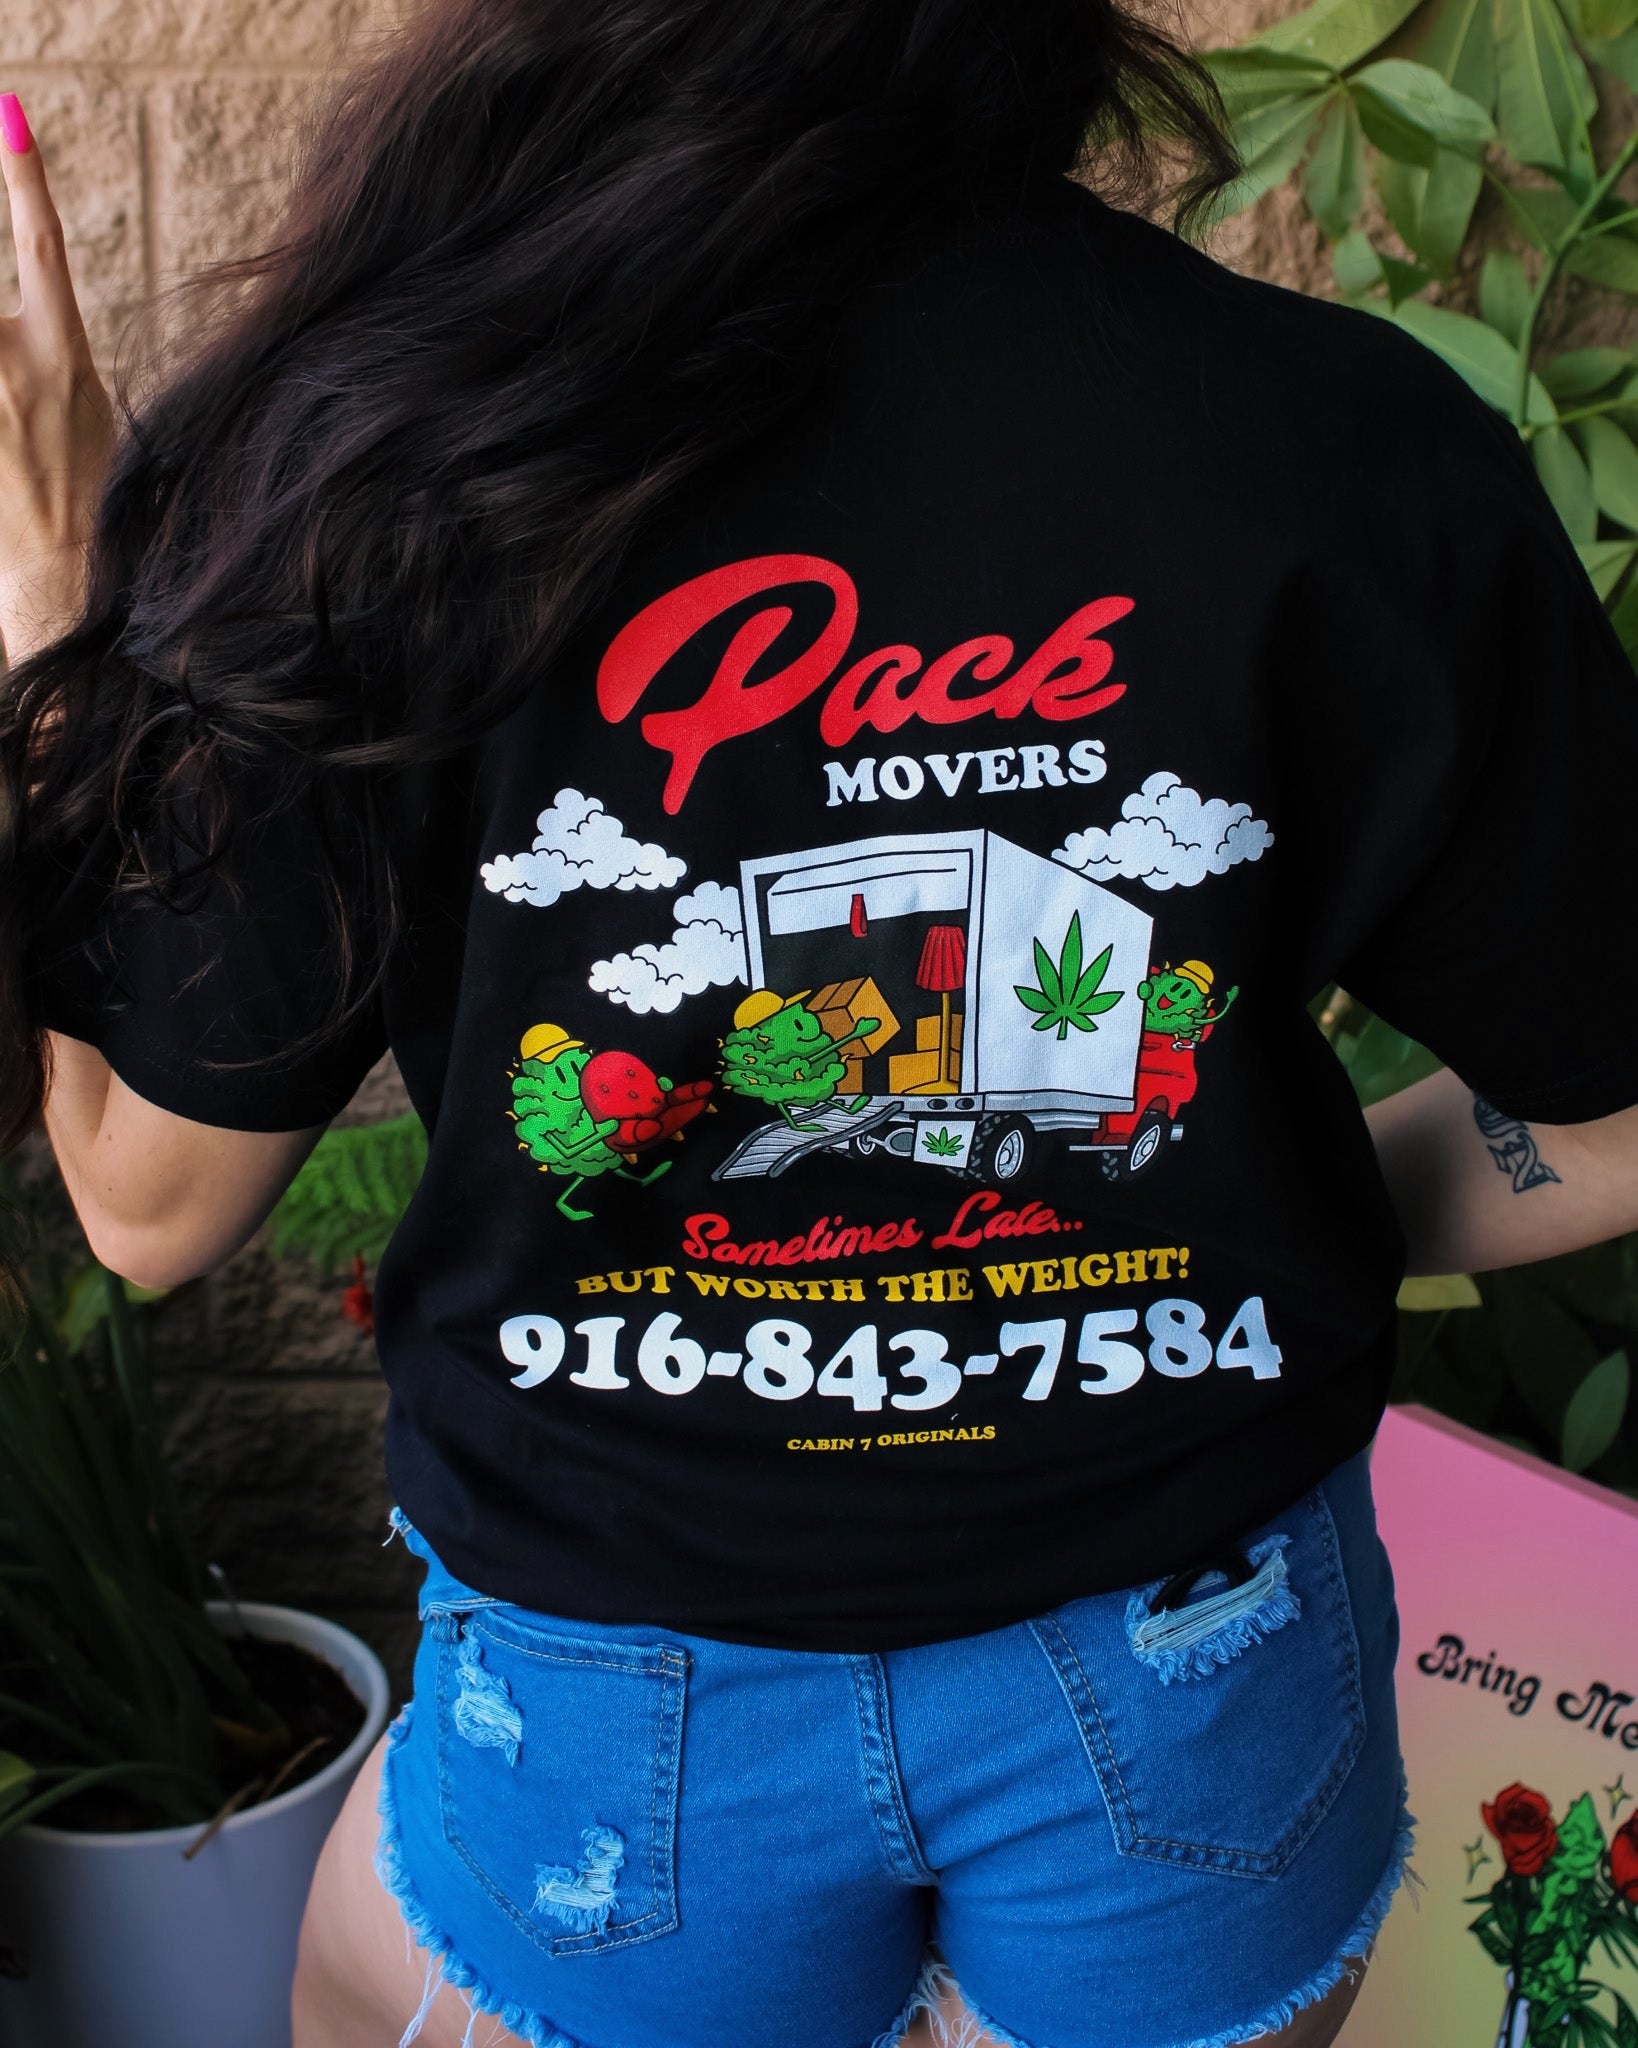 Pack Movers T-Shirt